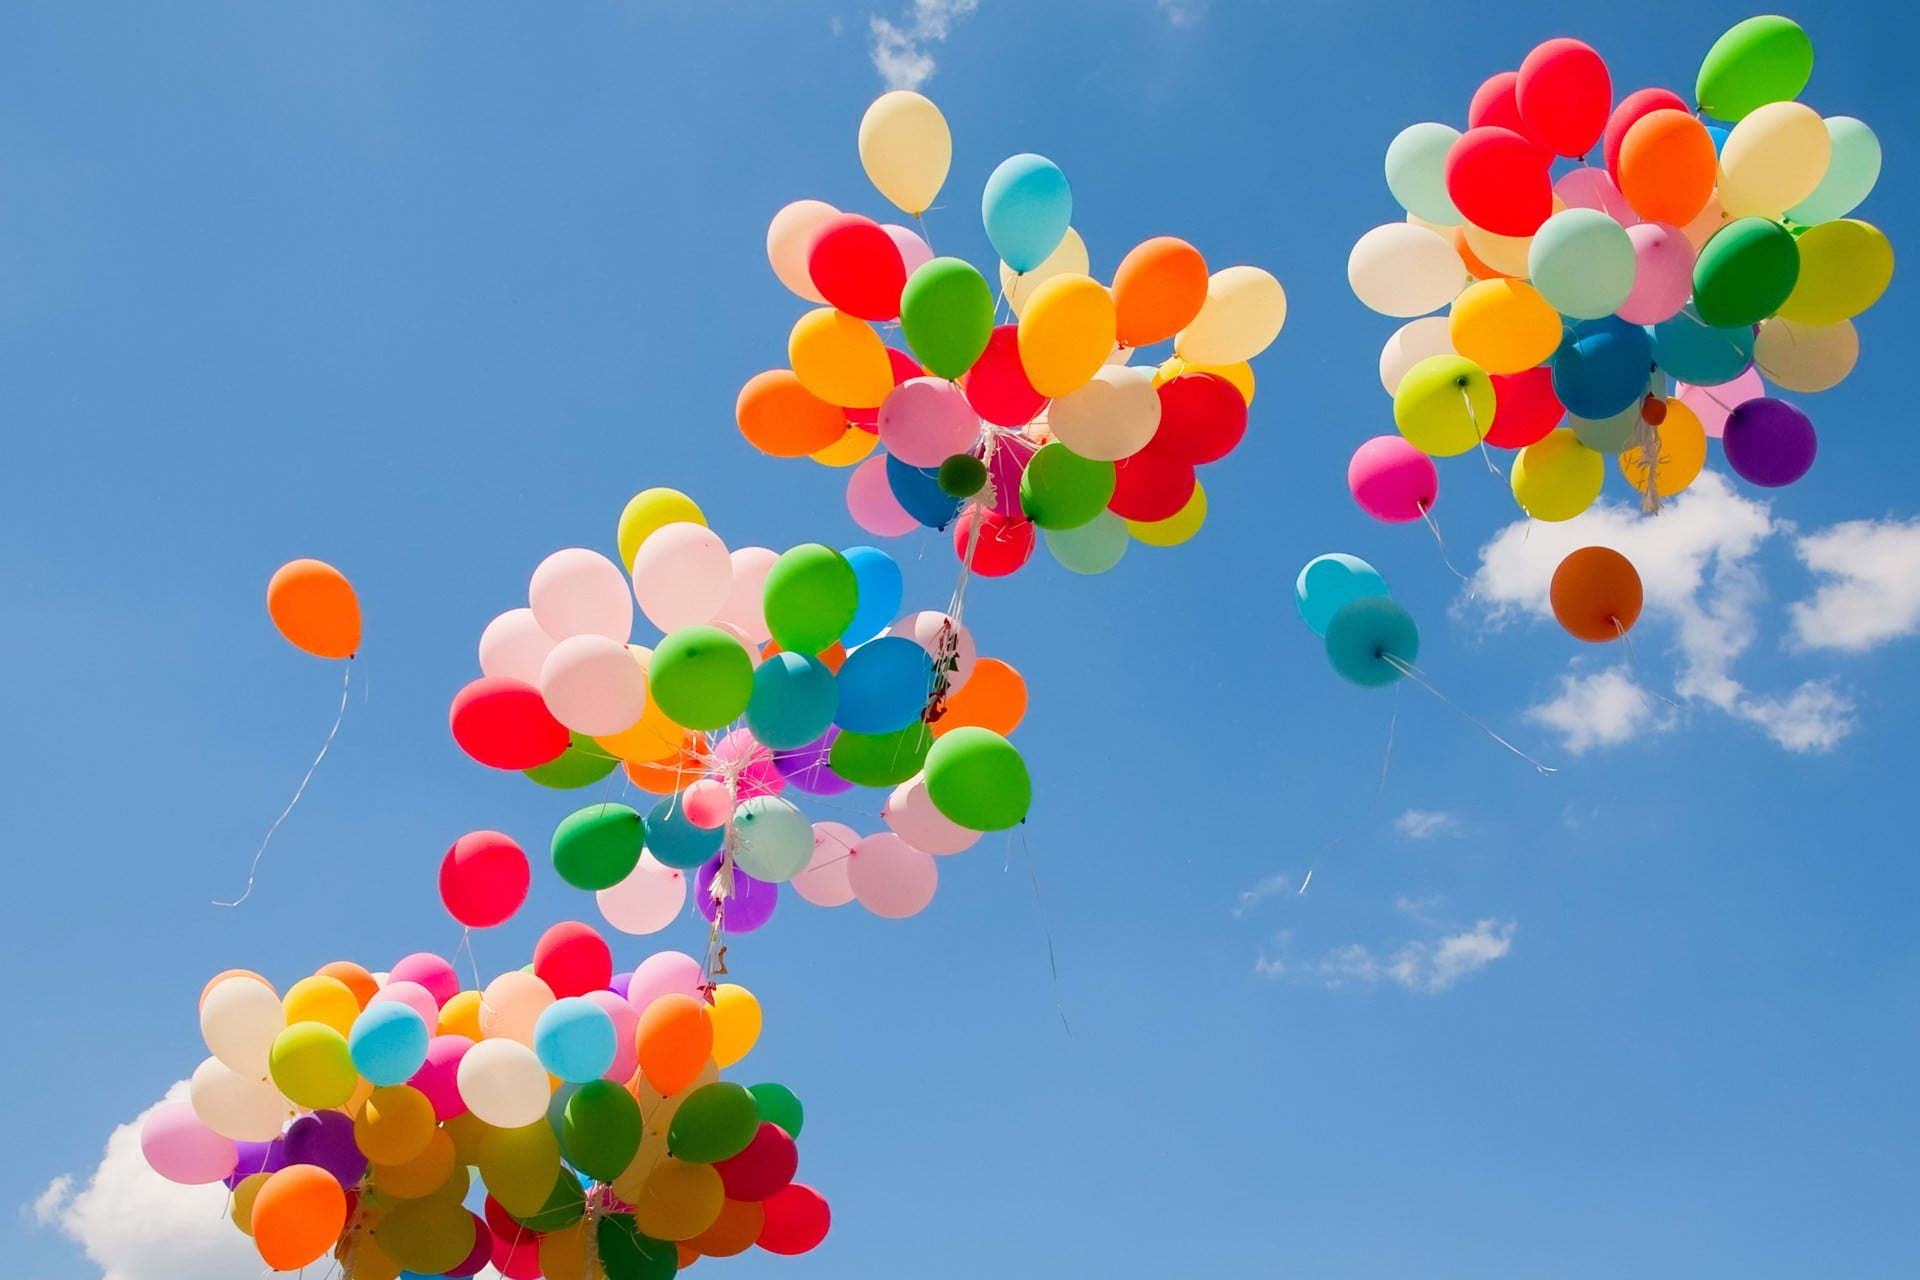 Assorted-color balloon lot, happy, colorful HD wallpaper | Wallpaper Flare